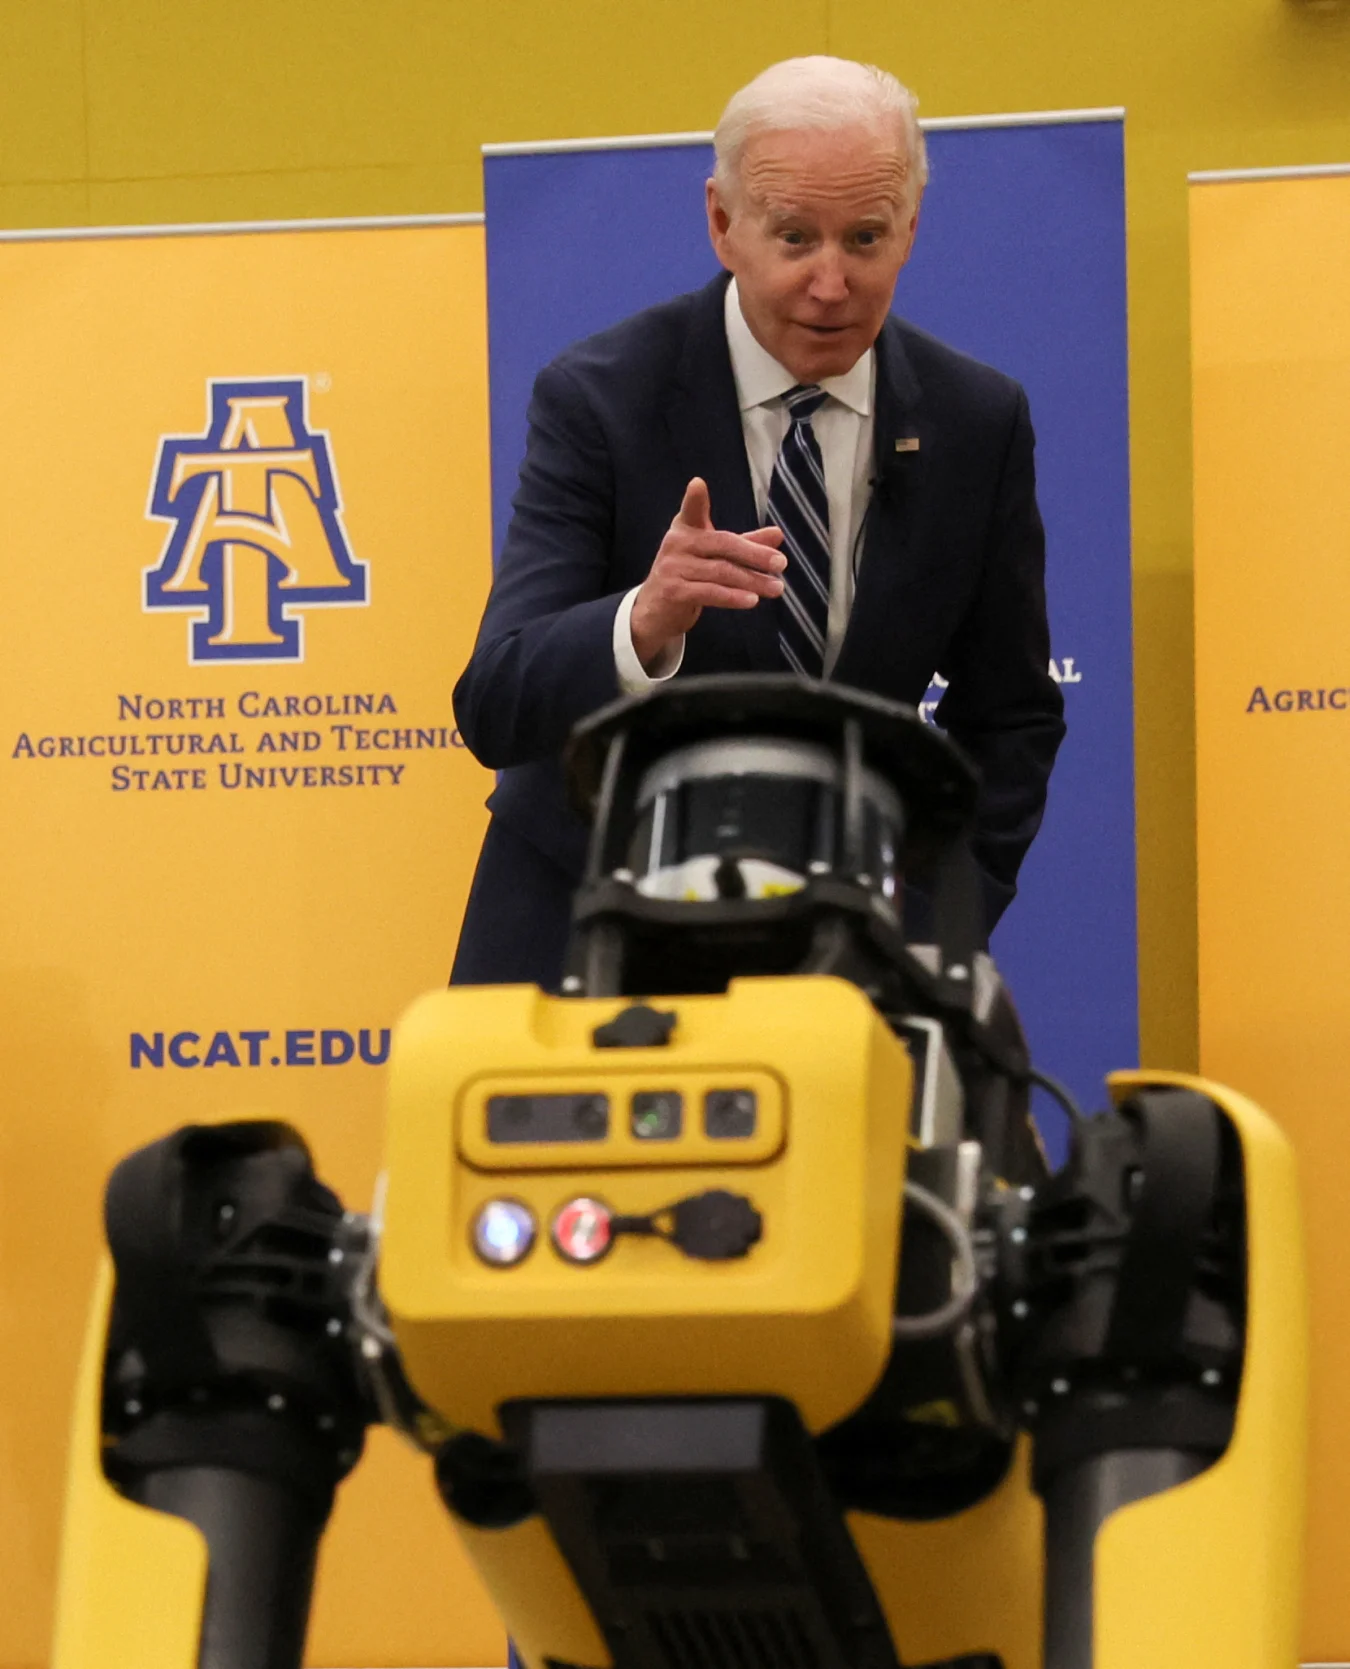 U.S. President Joe Biden points to a robotic dog named'Spot' at the Robotics Lab, North Carolina Agricultural and Technical State University, Harold L. Martin Engineering Research and Innovation Complex in Greensboro, North Carolina, U.S. April 14, 2022. REUTERS/ Leah millis